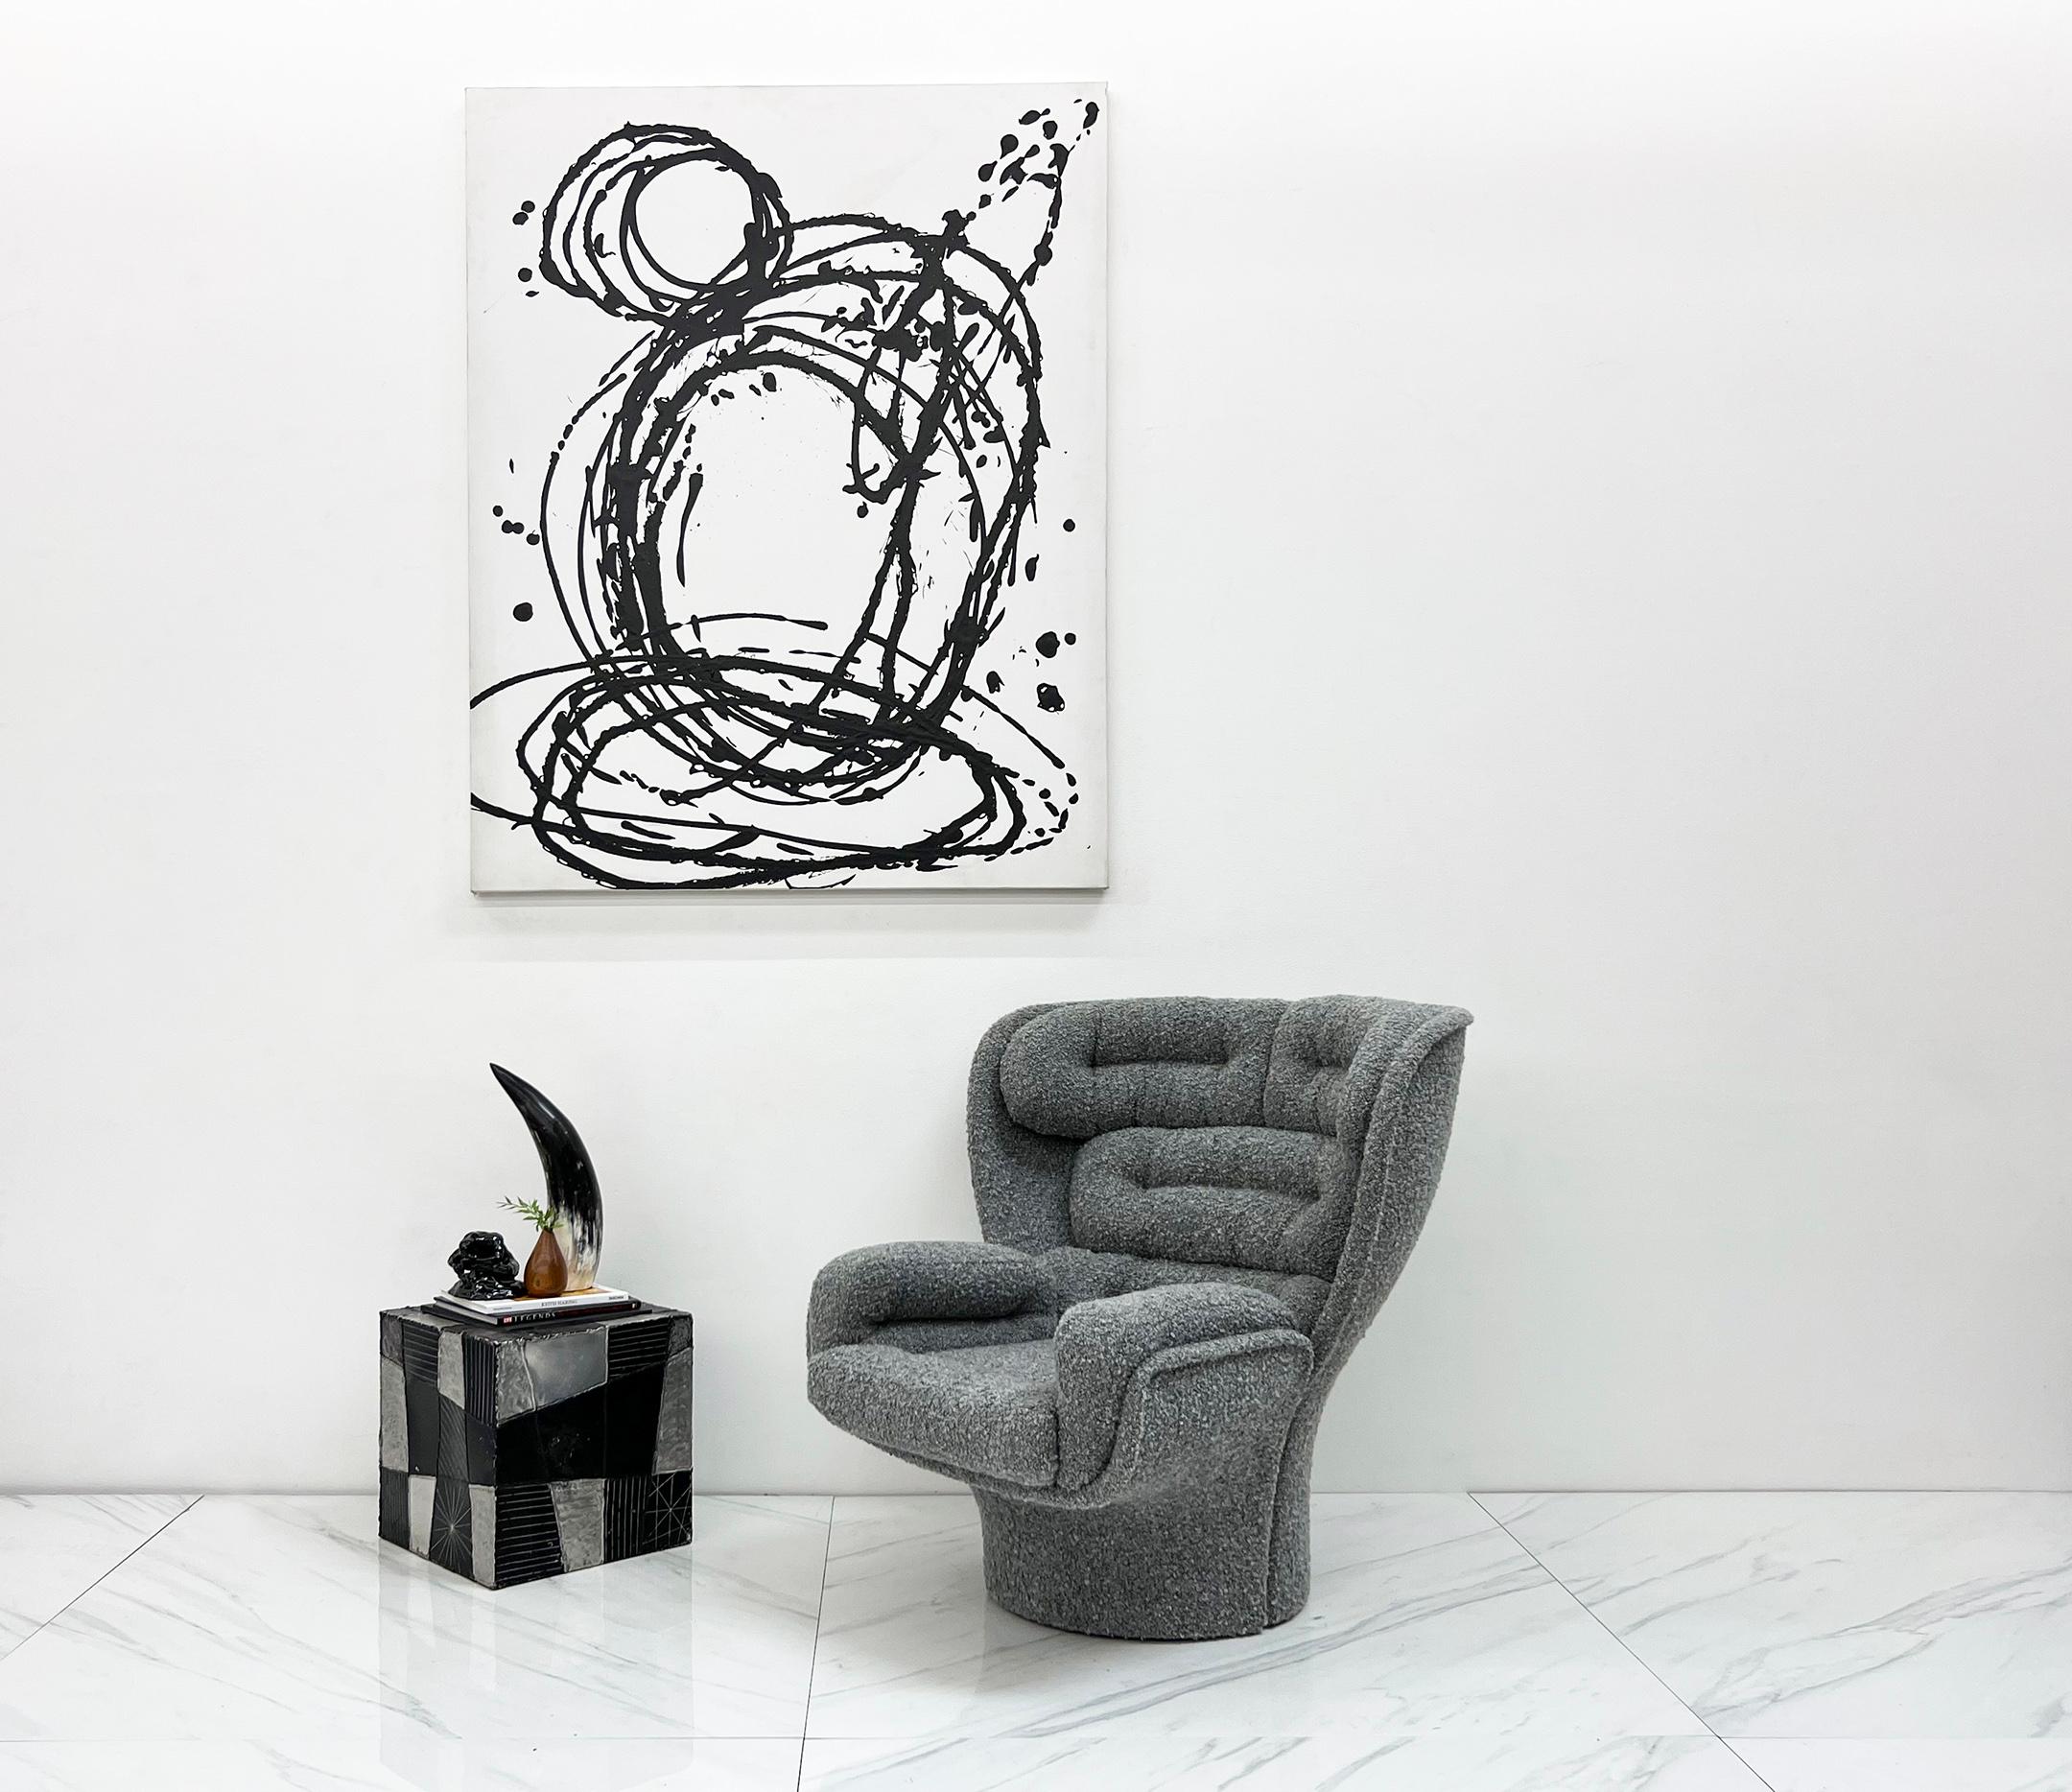 This chair is absolutely iconic-- designed by Joe Colombo in the 1960's this chair can be seen in the homes of tastemakers and celebrities like Alexander Werz and Jonathan Adler. This chair was designed in 1965 and this example is an early original